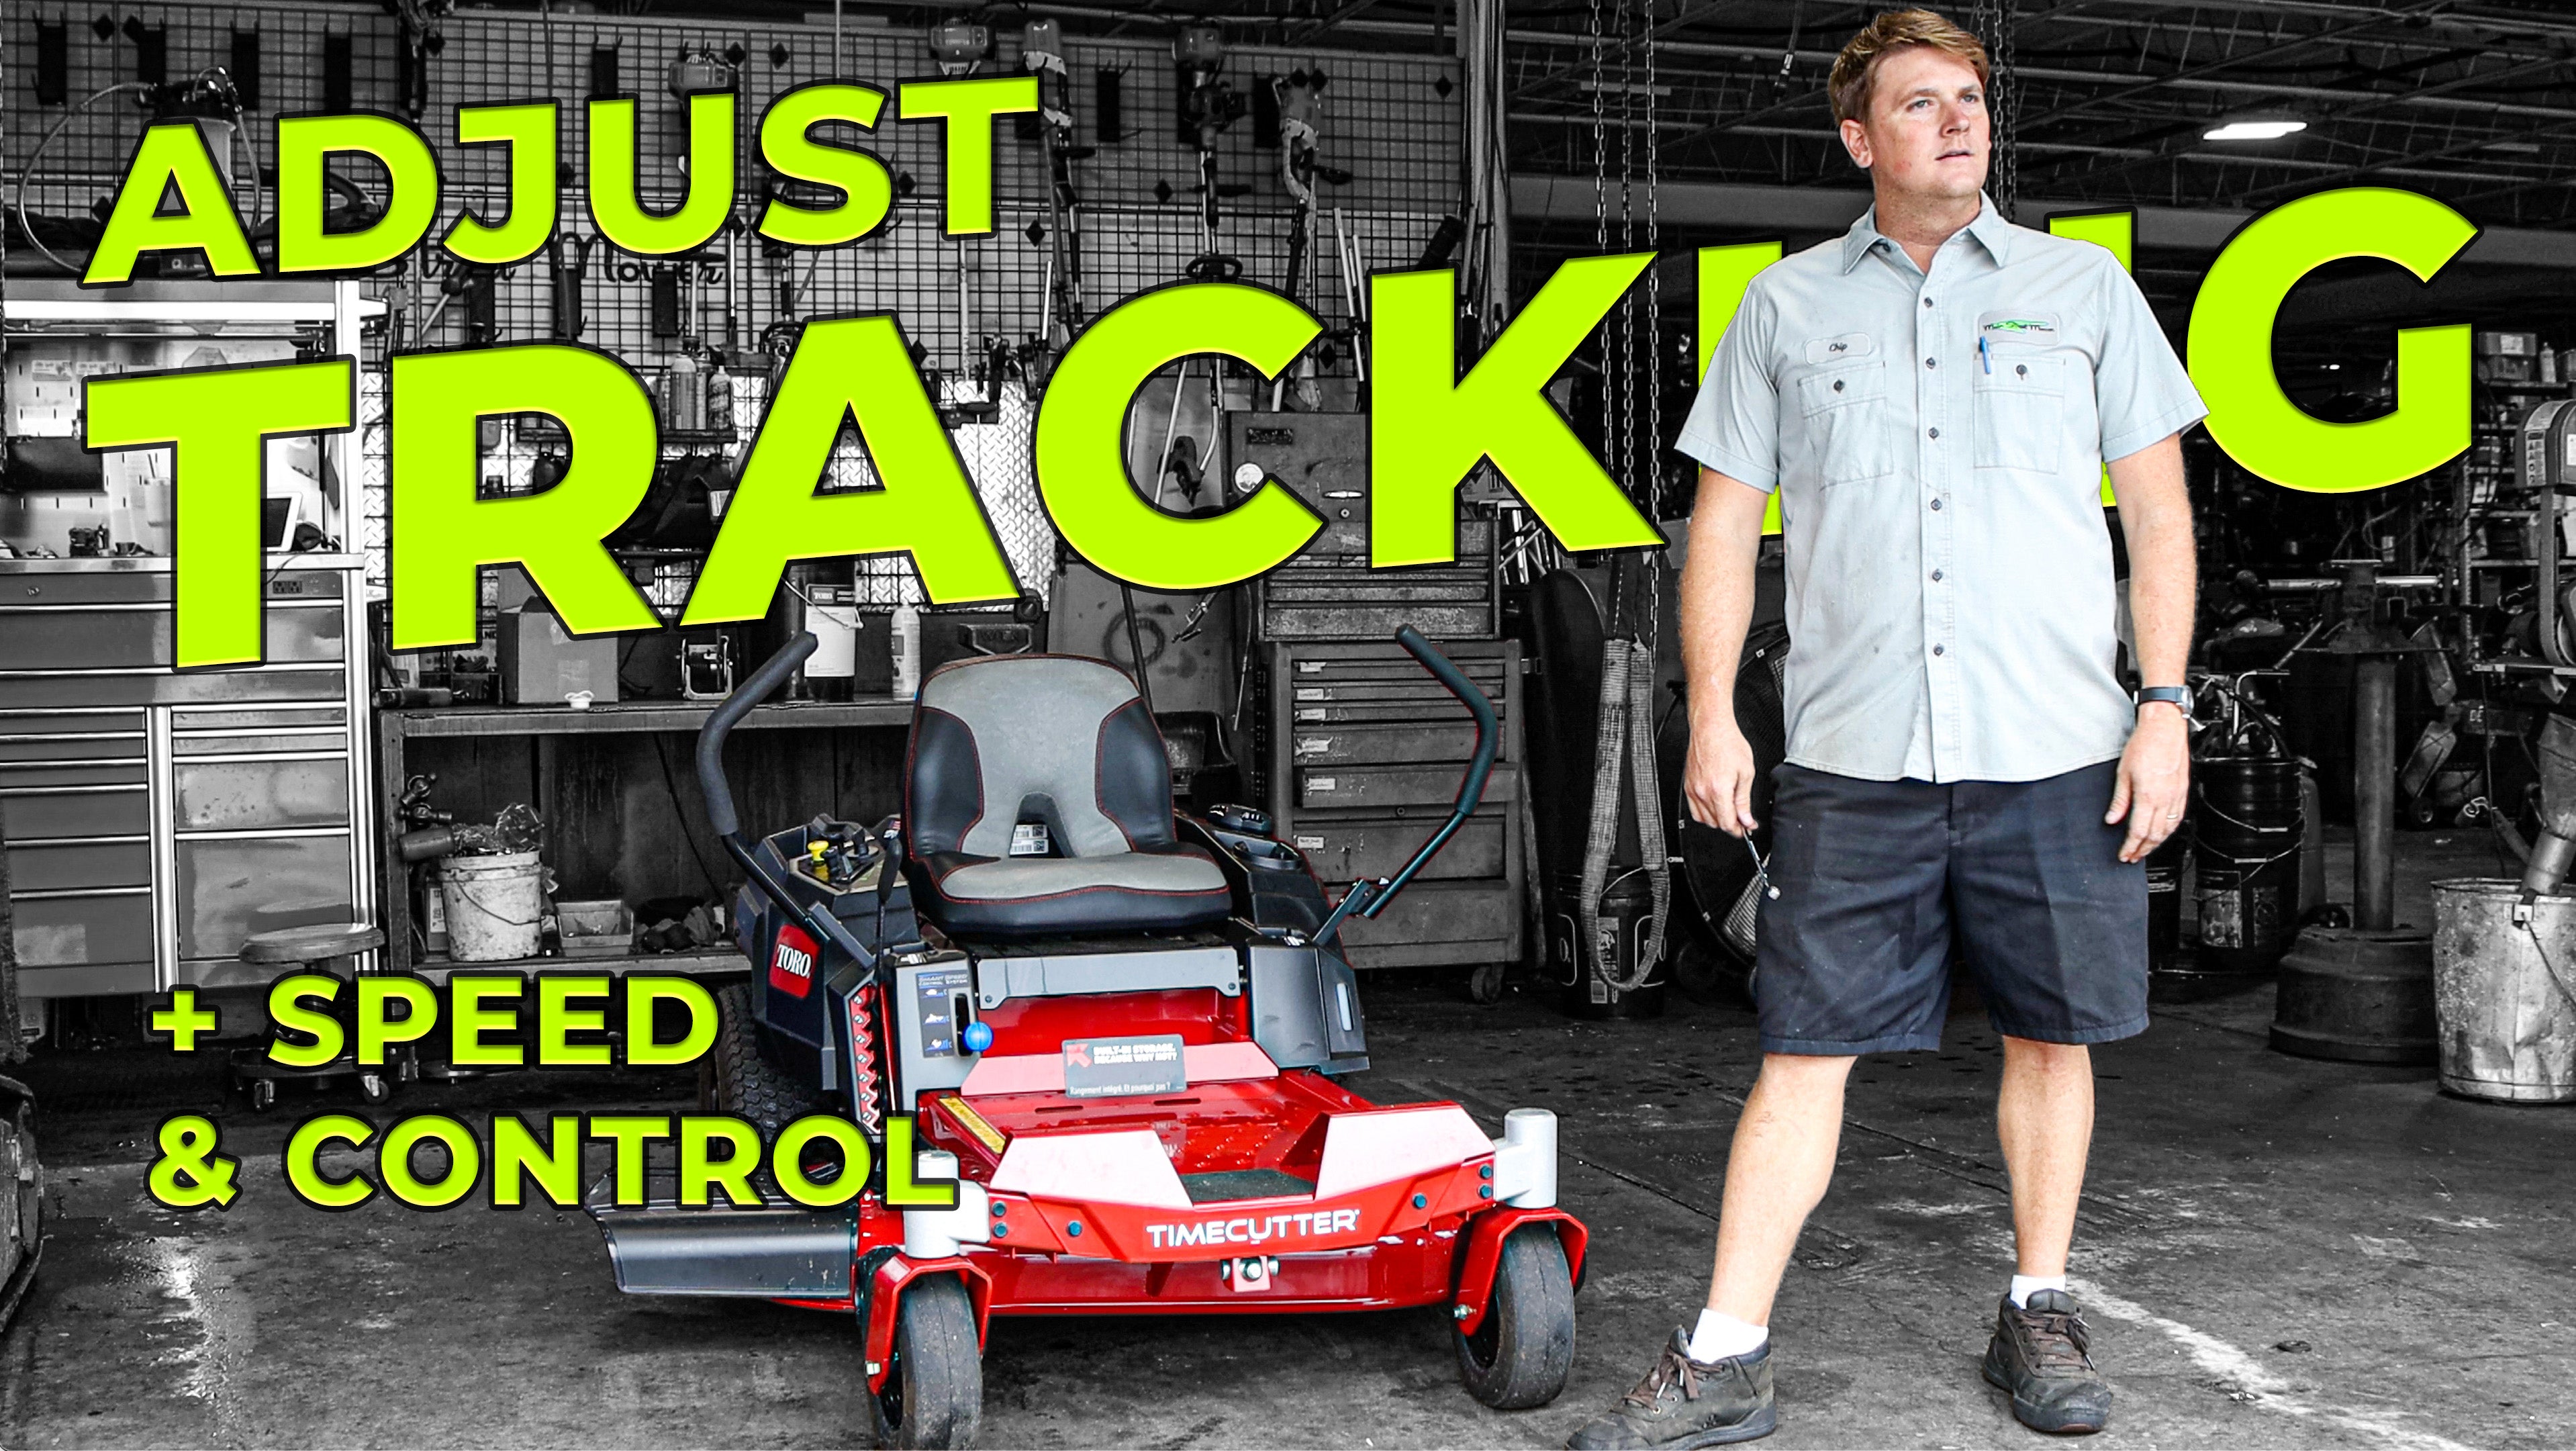 Ready to up your mowing efficiency? Check out how easy adjusting your mower's tracking can be! #GrassMasters